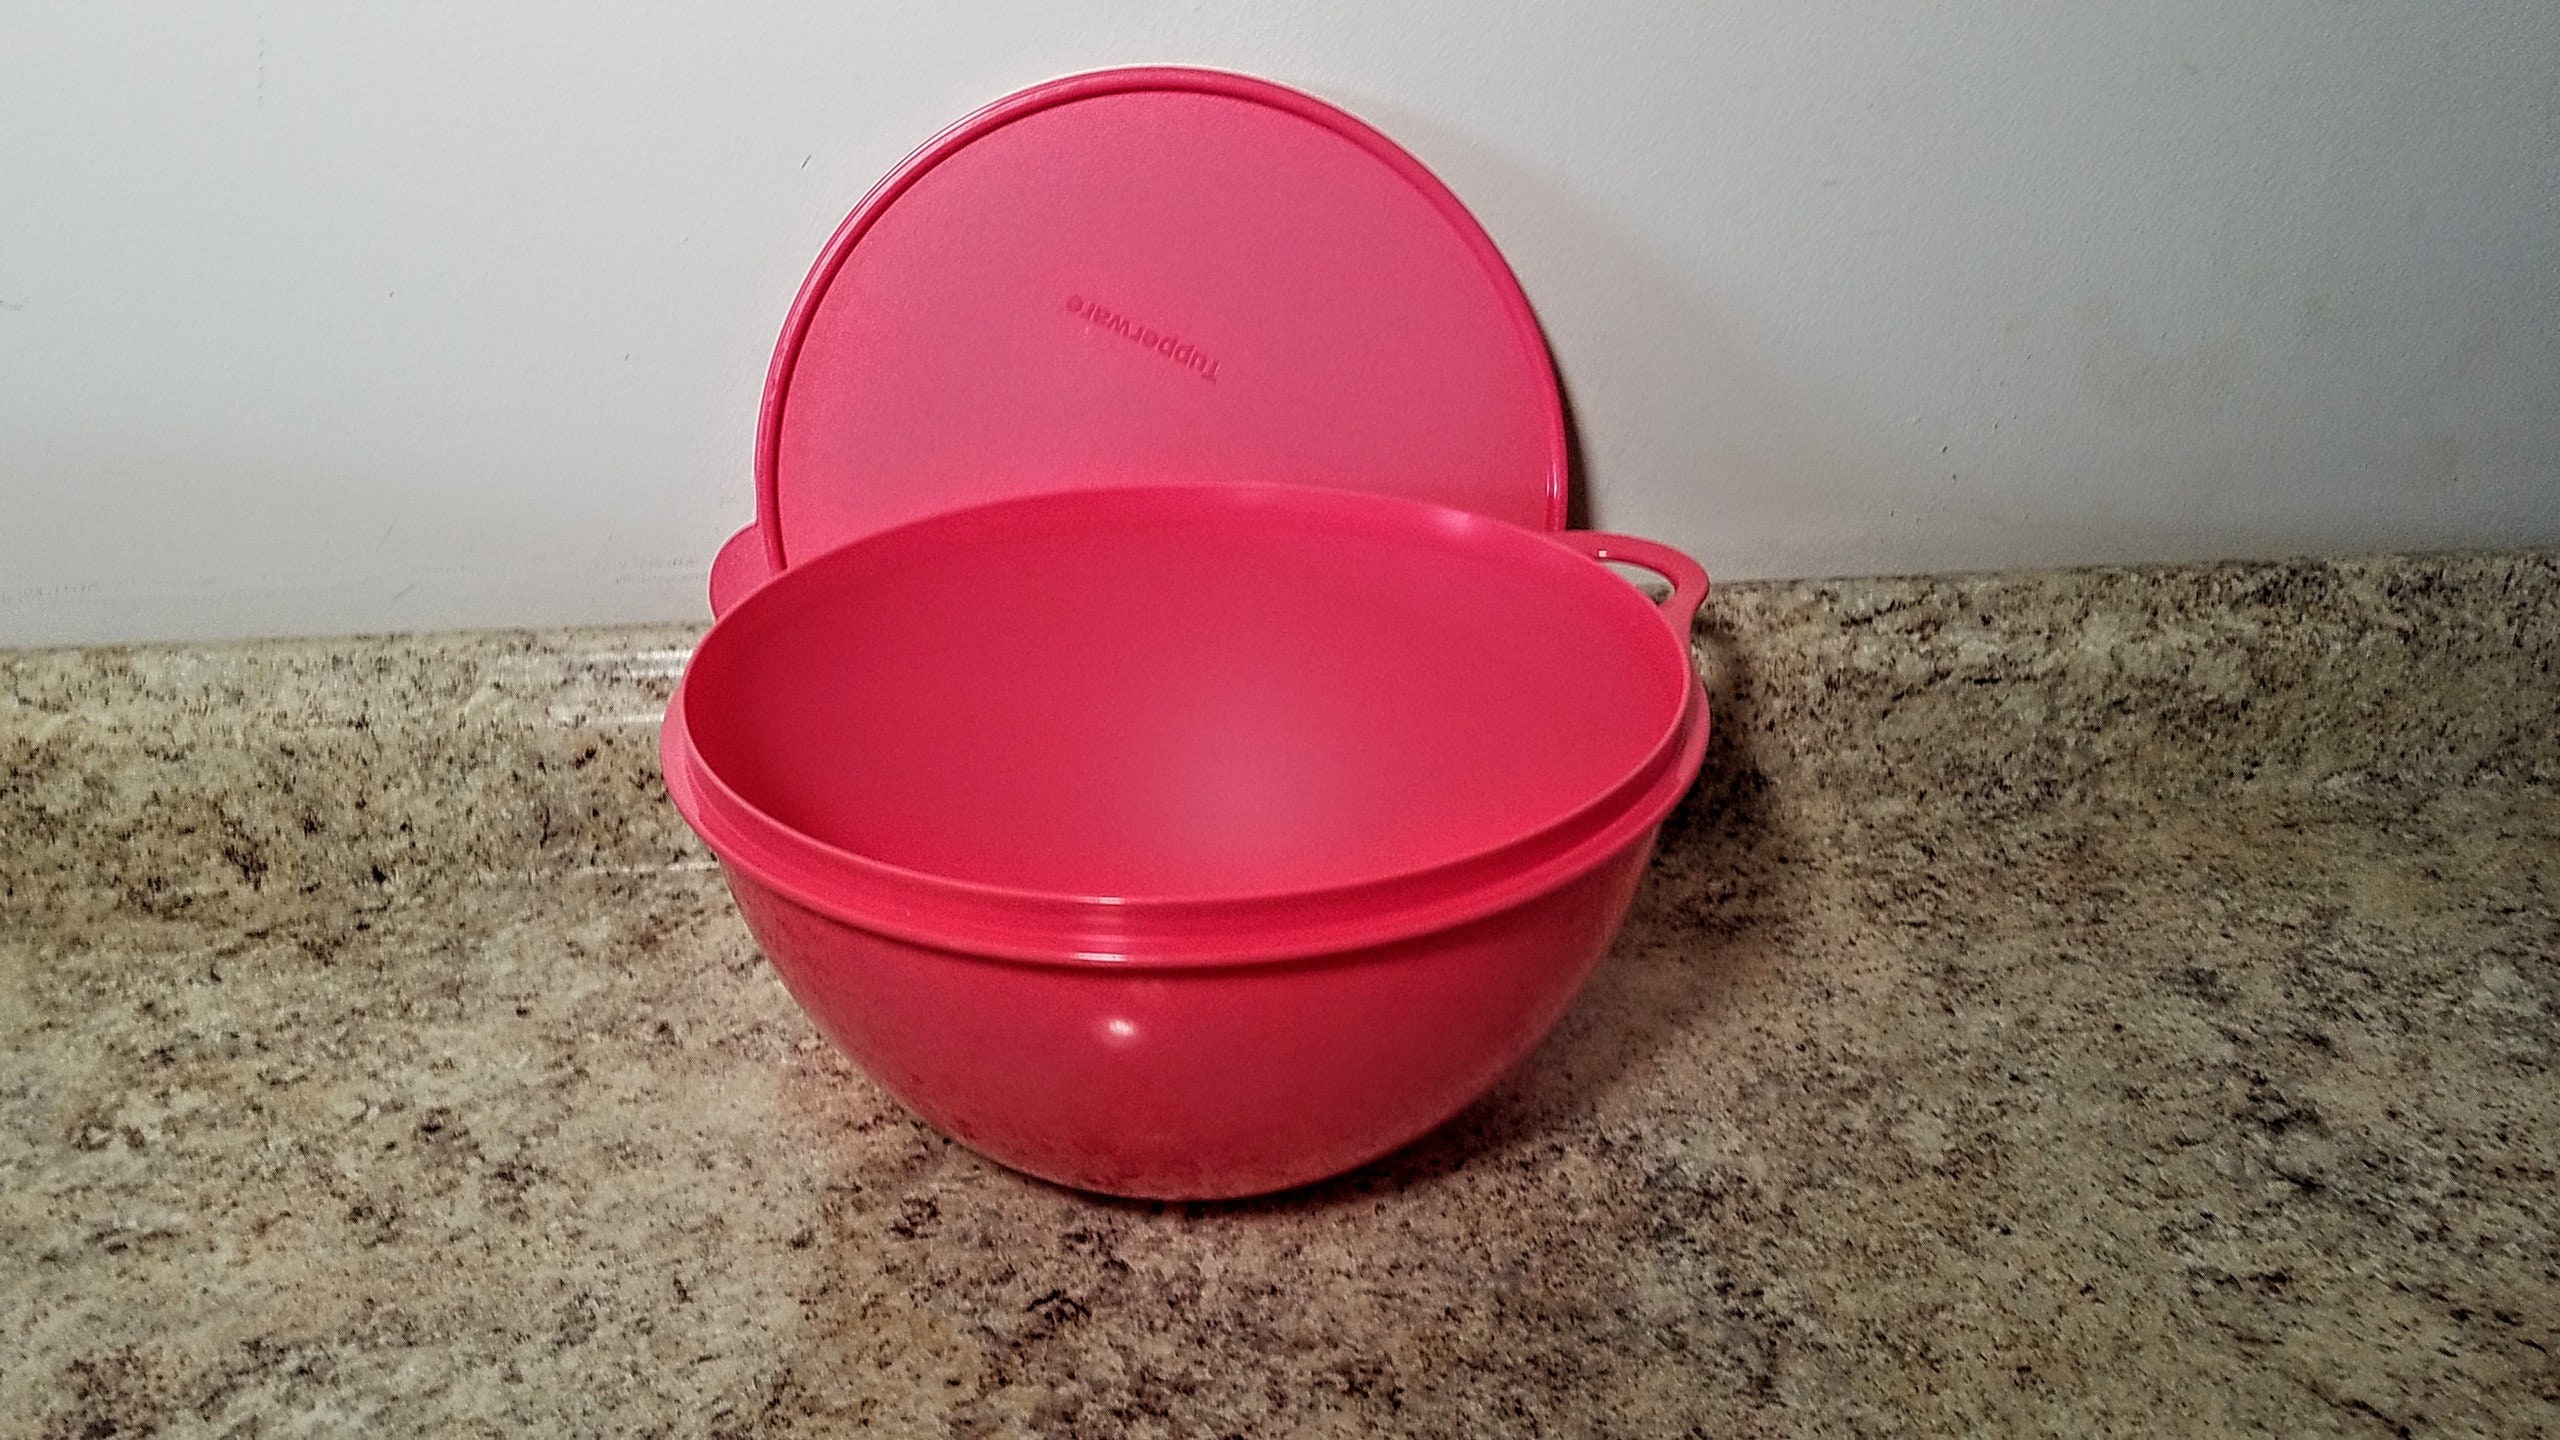 Tupperware Thatsa Bowl 32 Cup White Bowl #2539 With Red Seal #2540